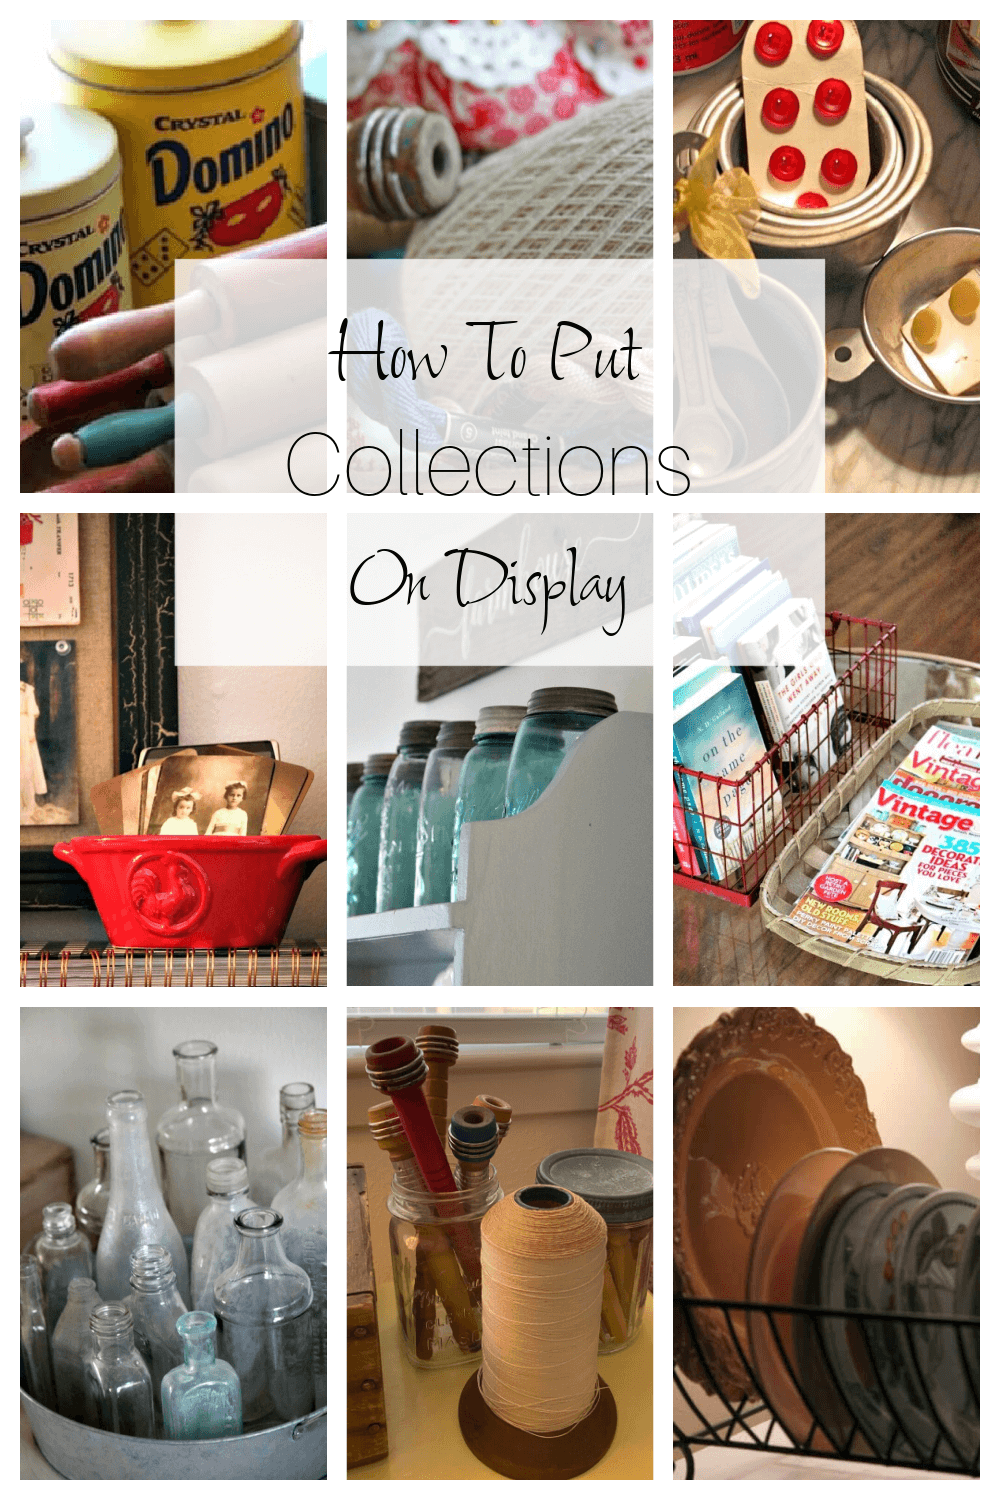 How To Put Collections On Display